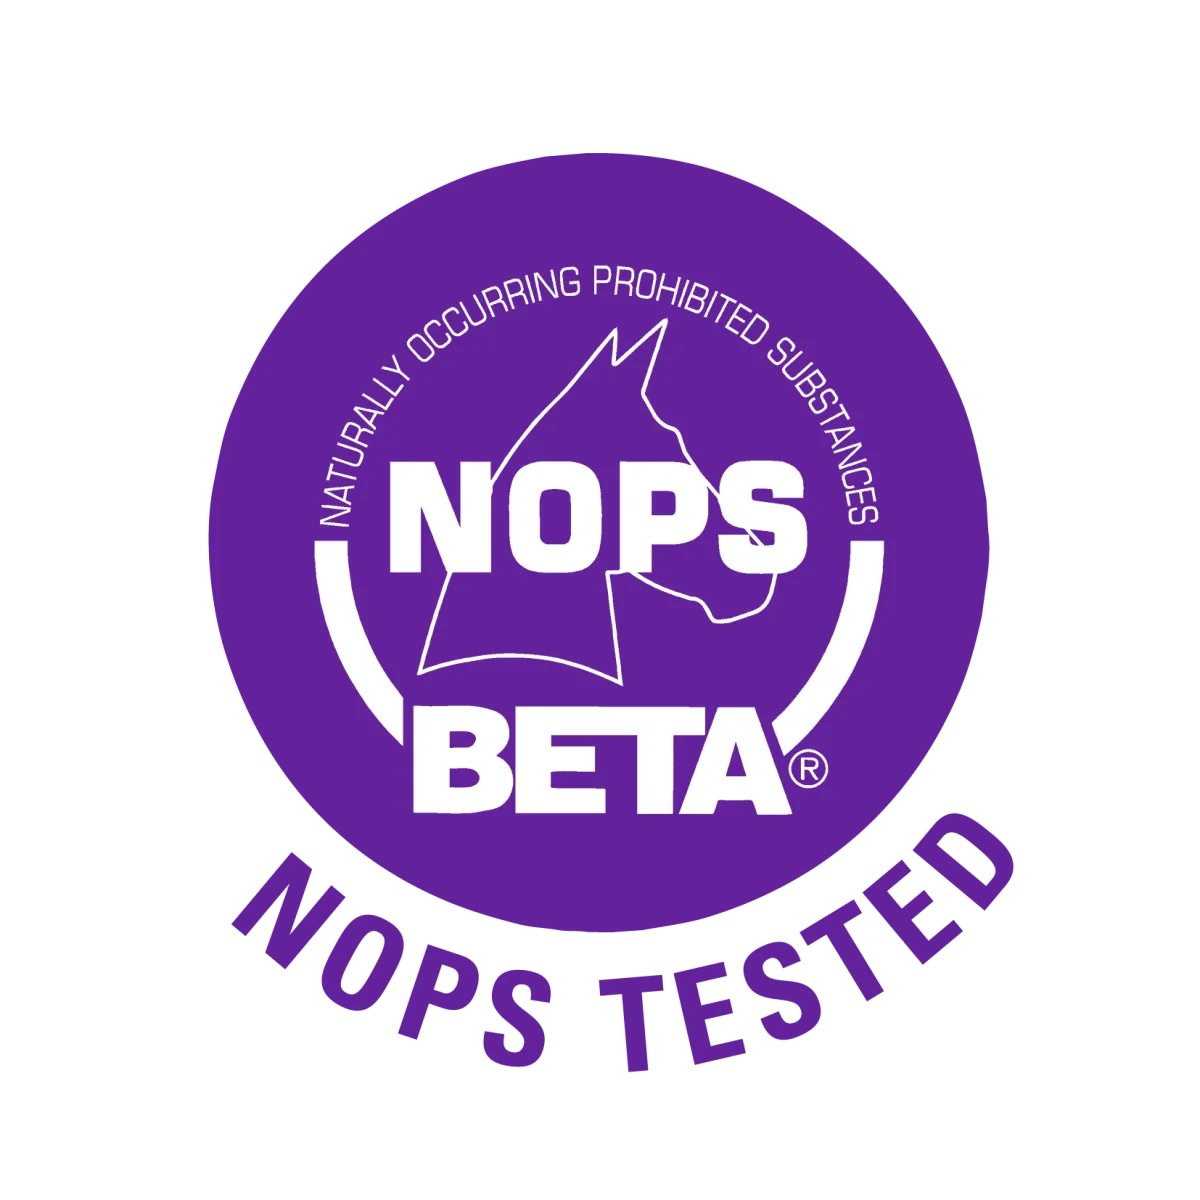 What are NOPS?